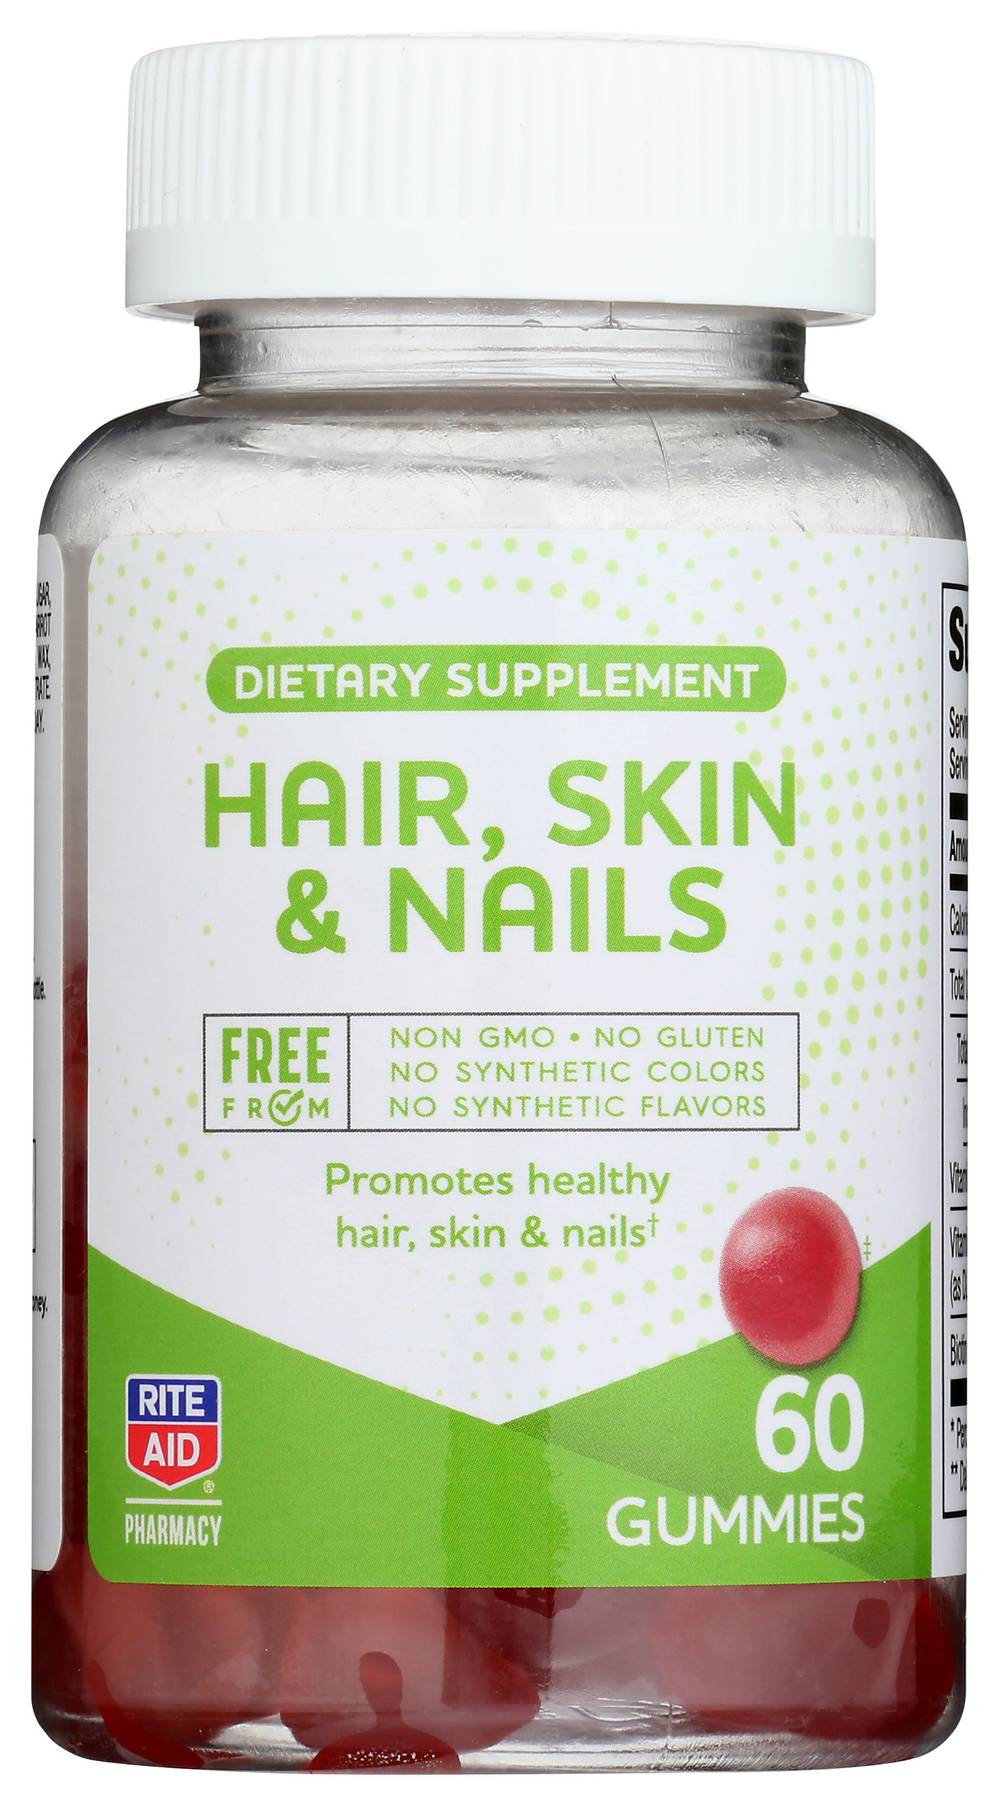 Rite Aid Pharmacy Free From Hair, Skin & Nails Gummy - 60 ct